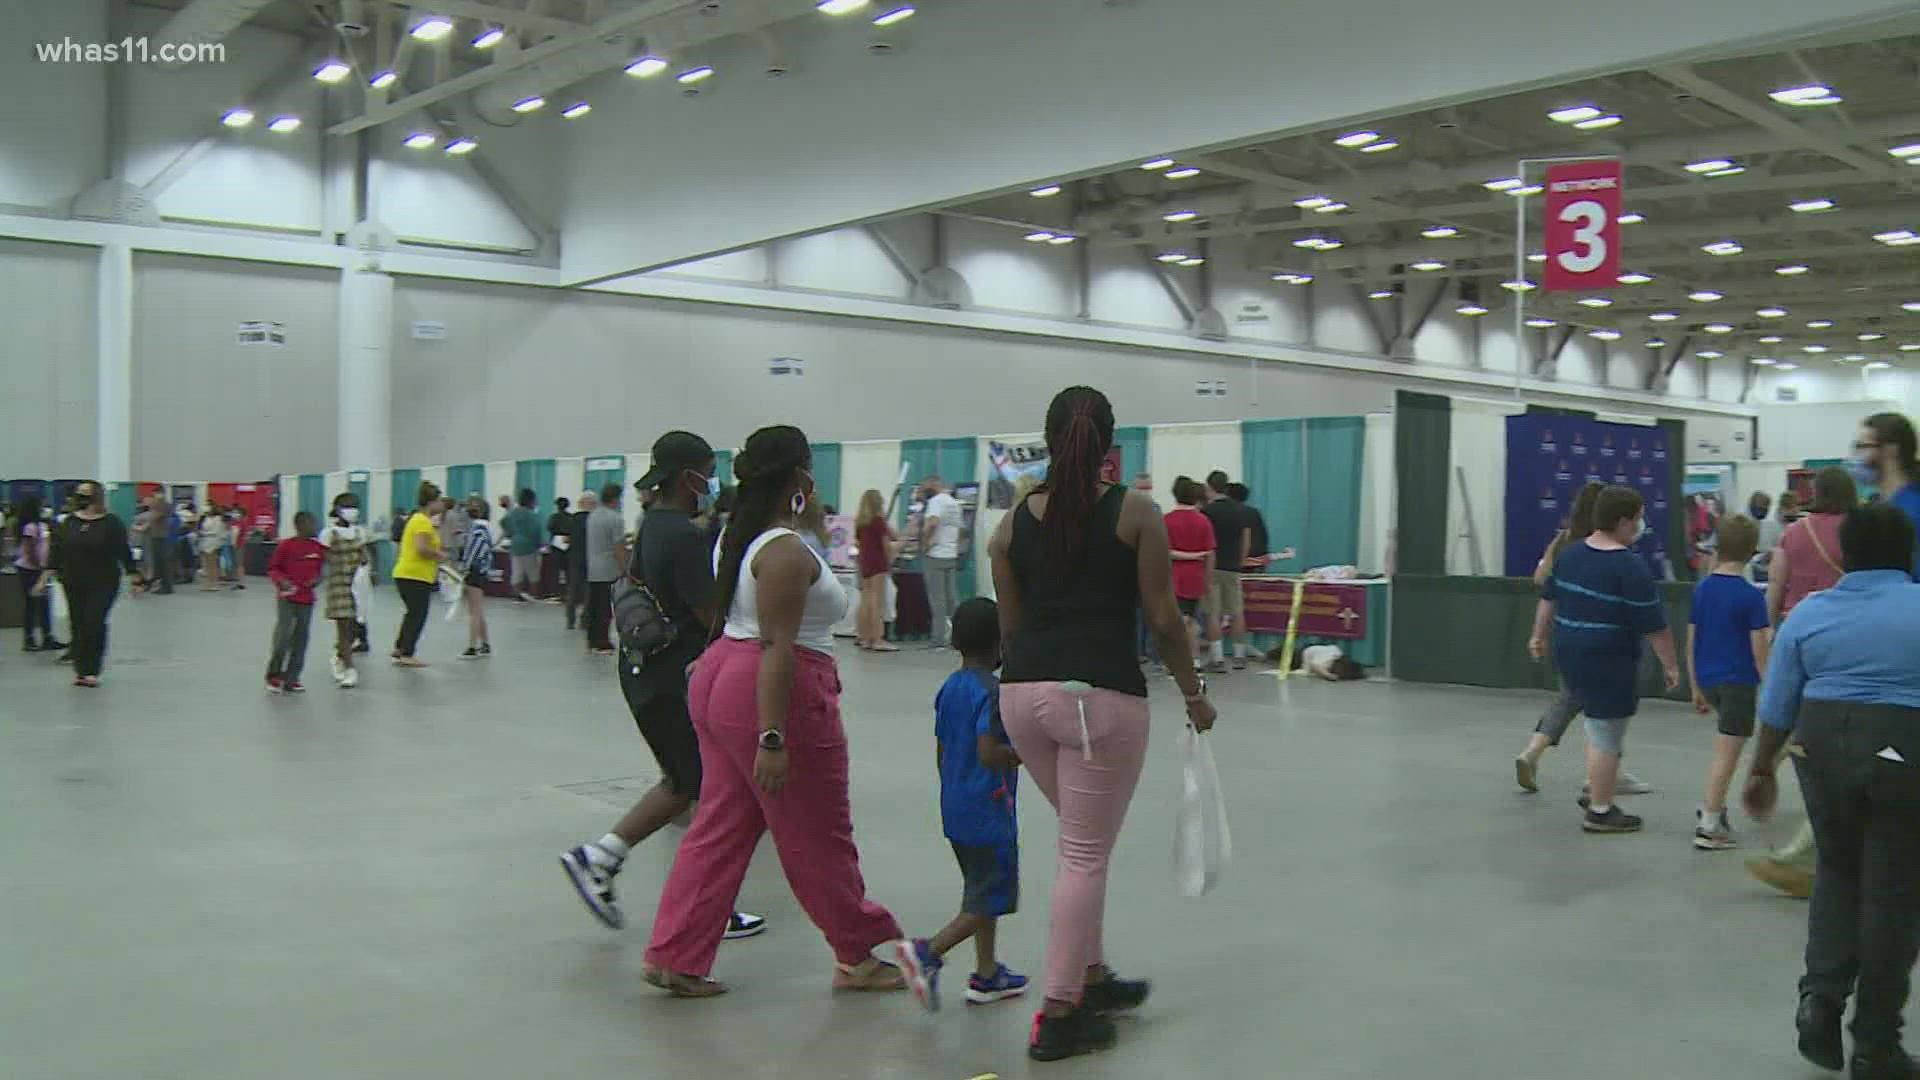 JCPS families got a chance to explore schools in the district with more than 150 schools under one roof and it helps families choose the right one for them.